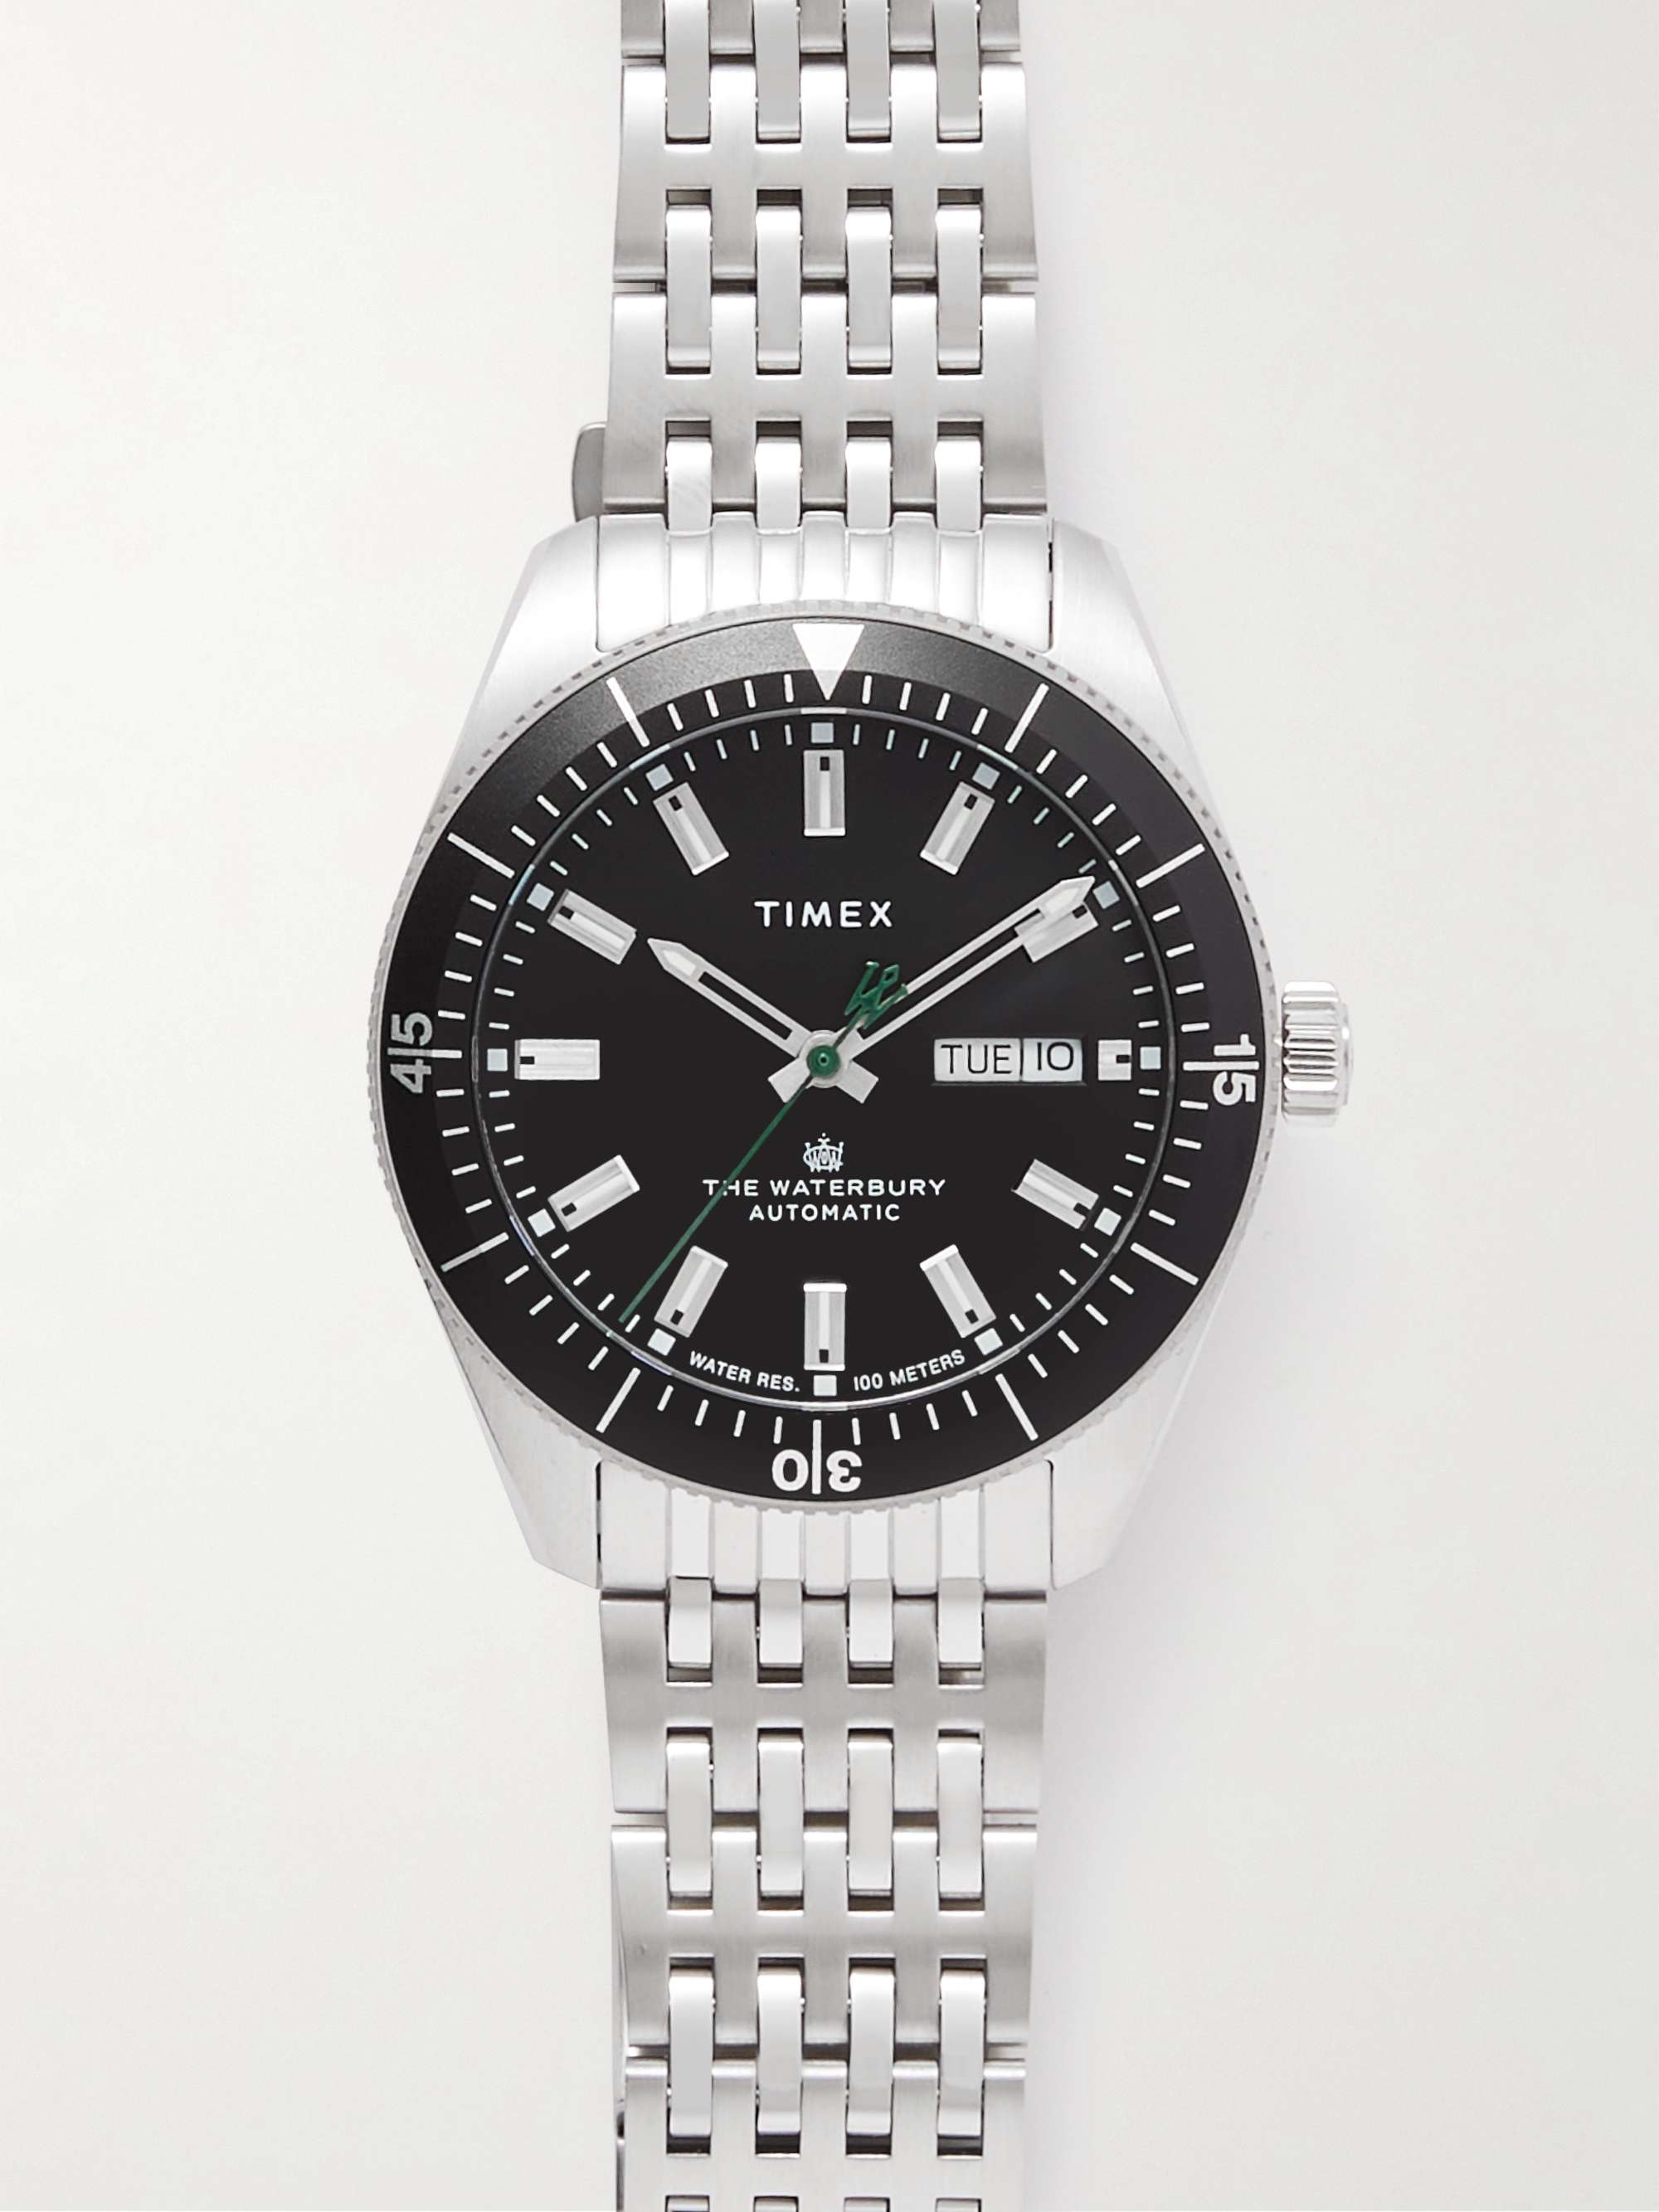 TIMEX Waterbury Dive Automatic 40mm Stainless Steel Watch